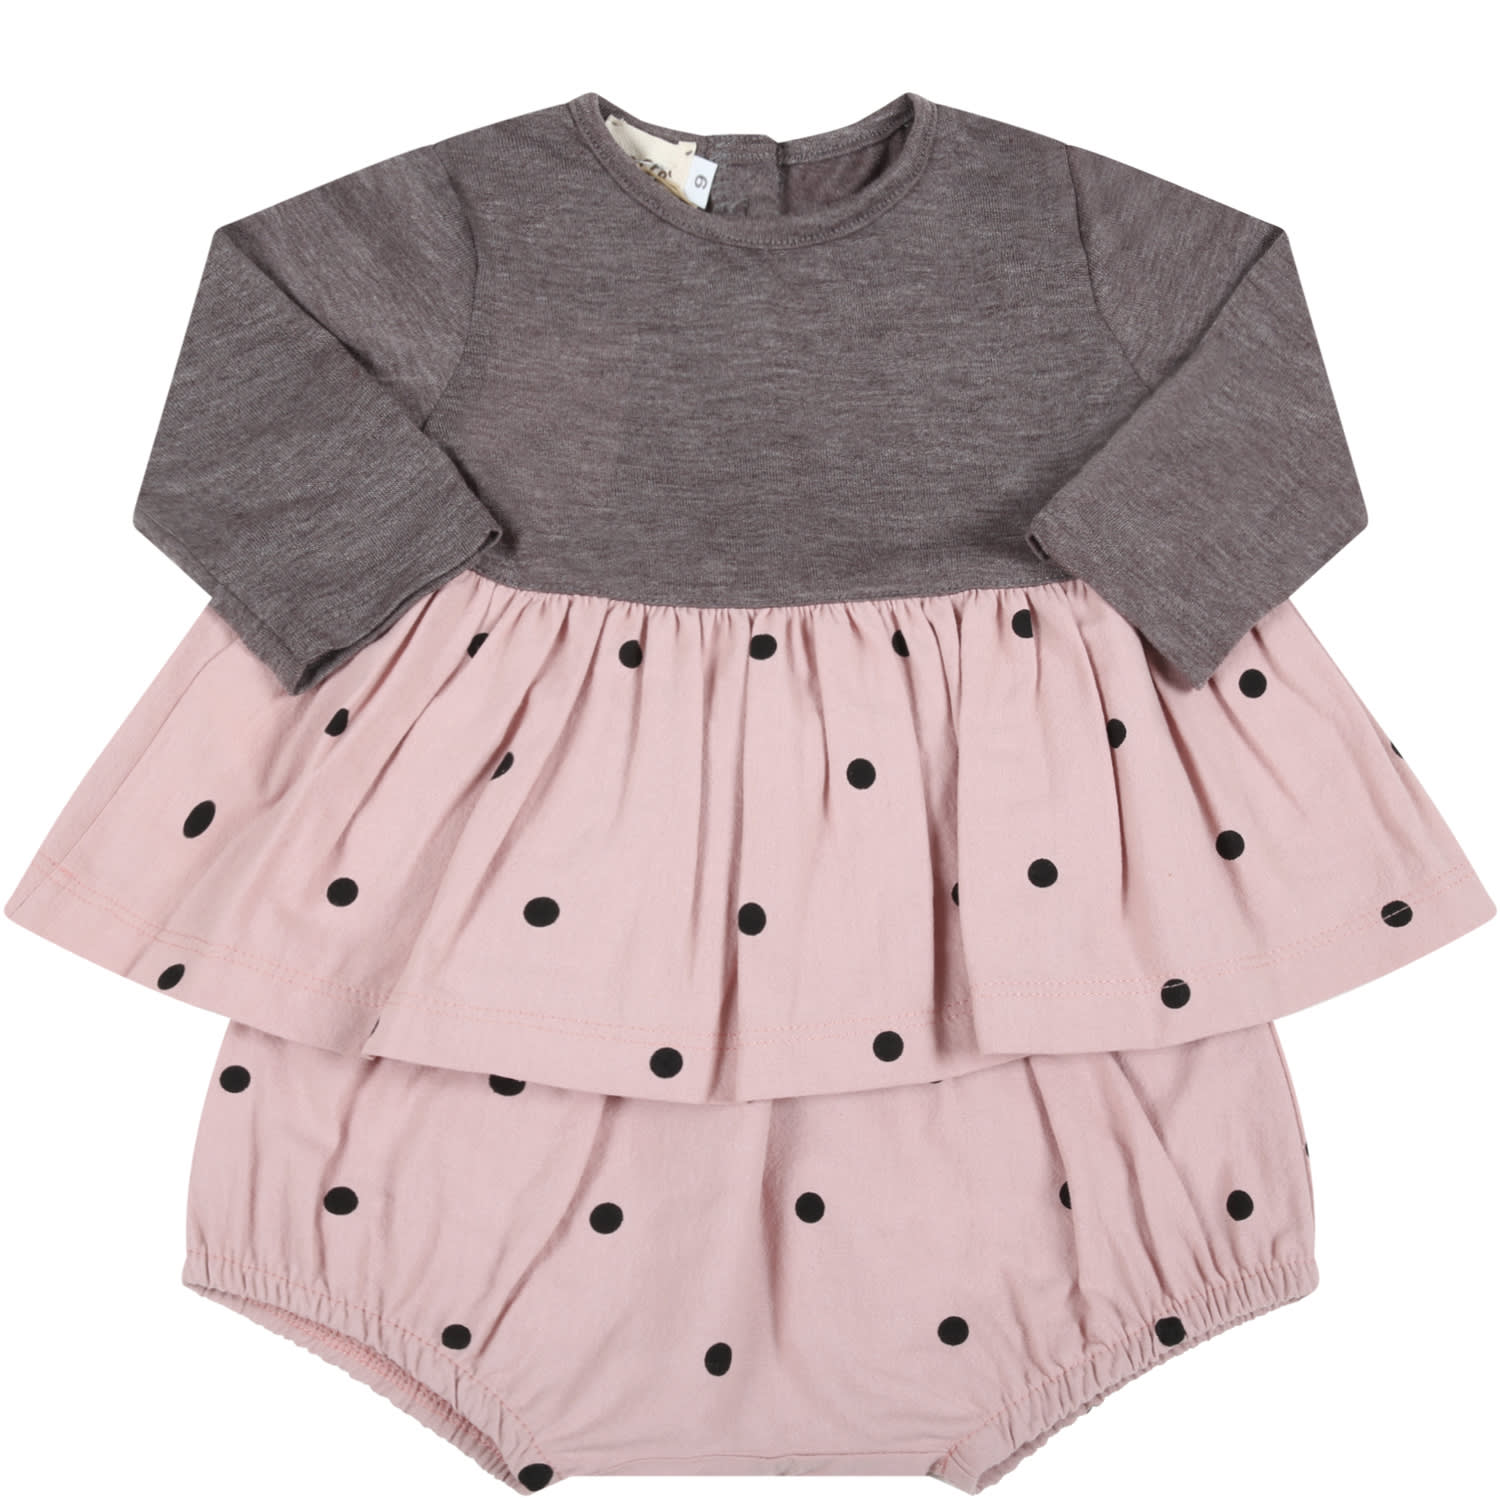 Caffe dOrzo Multicolor cleo-baby Dress For Baby Girl With Black Polka Dots